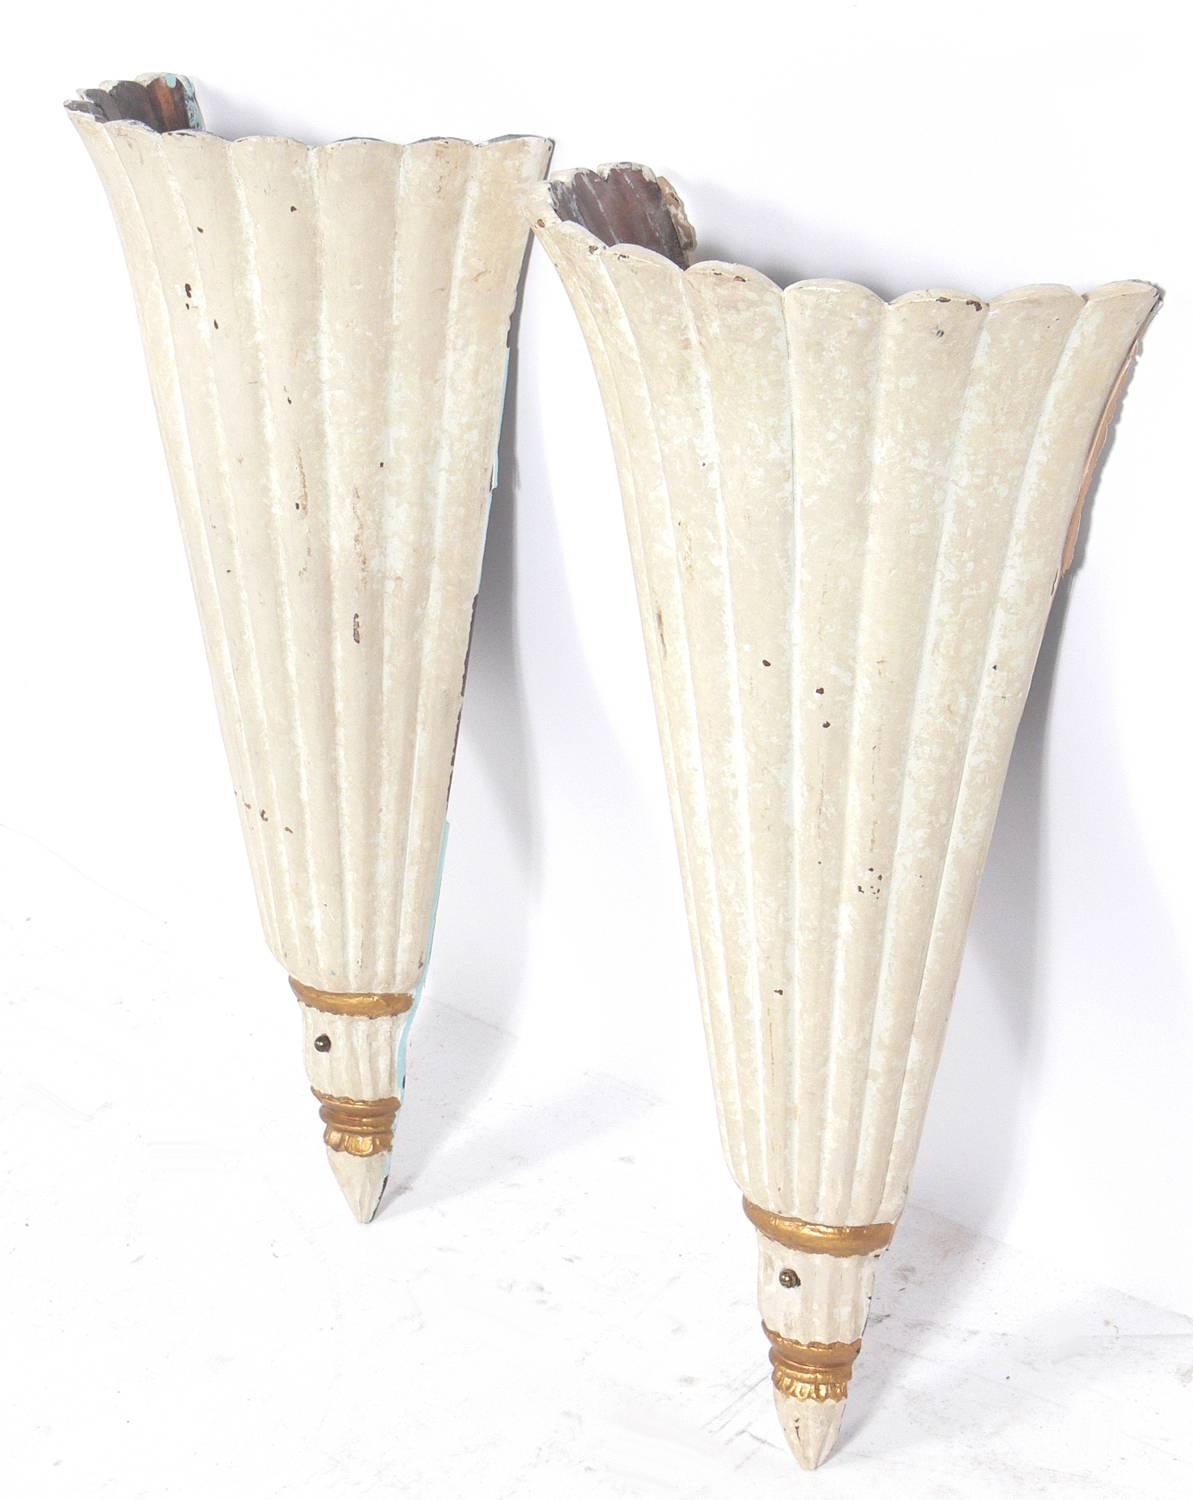 Pair of Italian painted wood sconces, Italy, at least circa 1930s, possibly earlier. They have been rewired and are ready to use. We have four pairs of these available. The price noted below is for one pair of sconces.